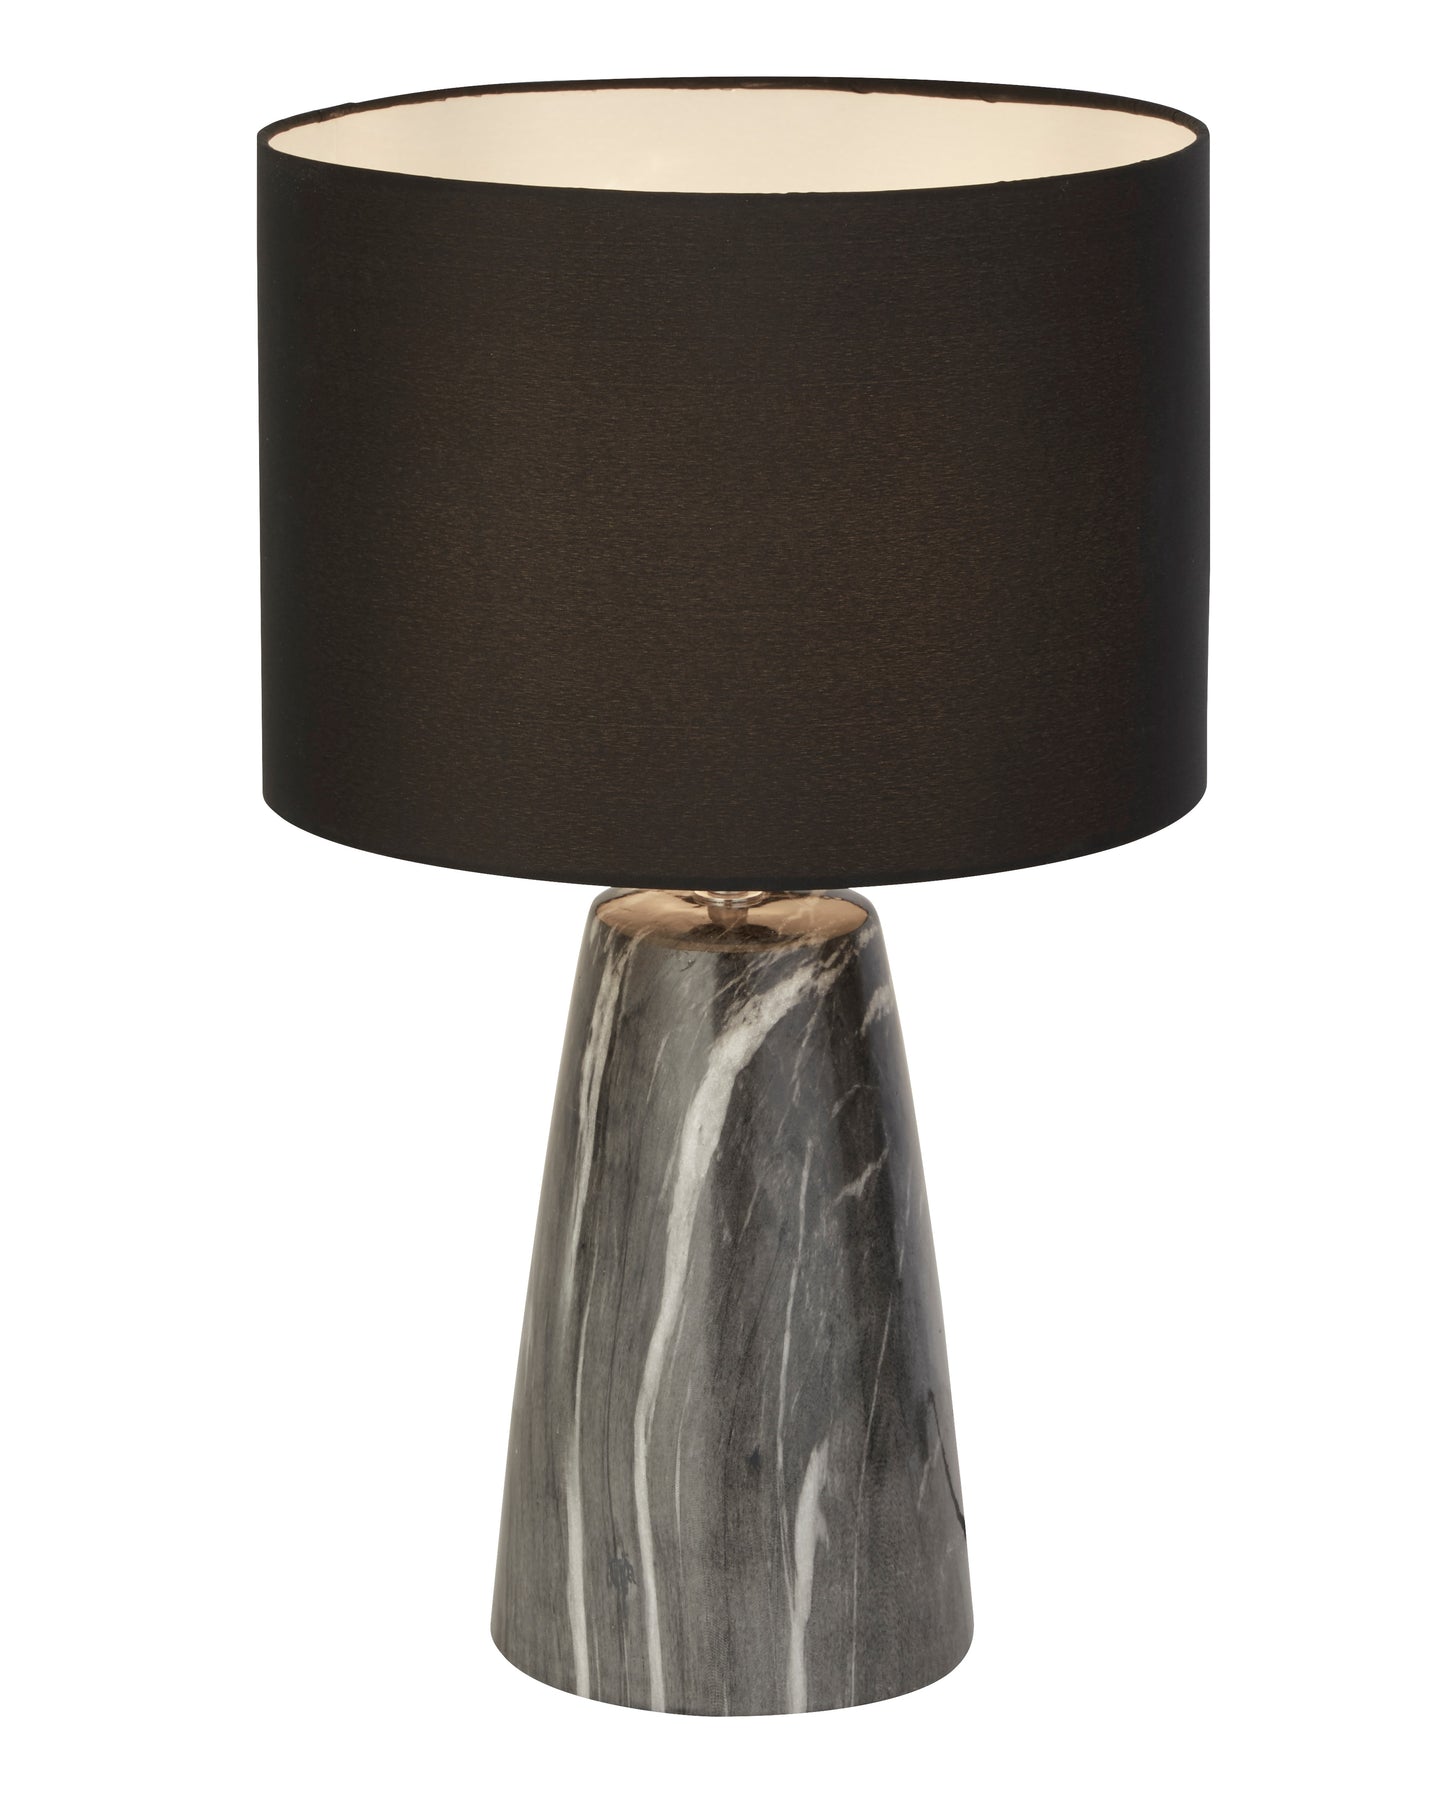 Our Siri grey marbled ceramic table lamp is sleek and elegant in appearance. This fabulous lamp is a must have for the hallway or living room. The light is finished with a luxury round black fabric shade. Bring a classic and sophisticated look into your home with this timeless design. The lamp is suitable for wattage up to 40 W, ensuring efficient lighting for your interior.